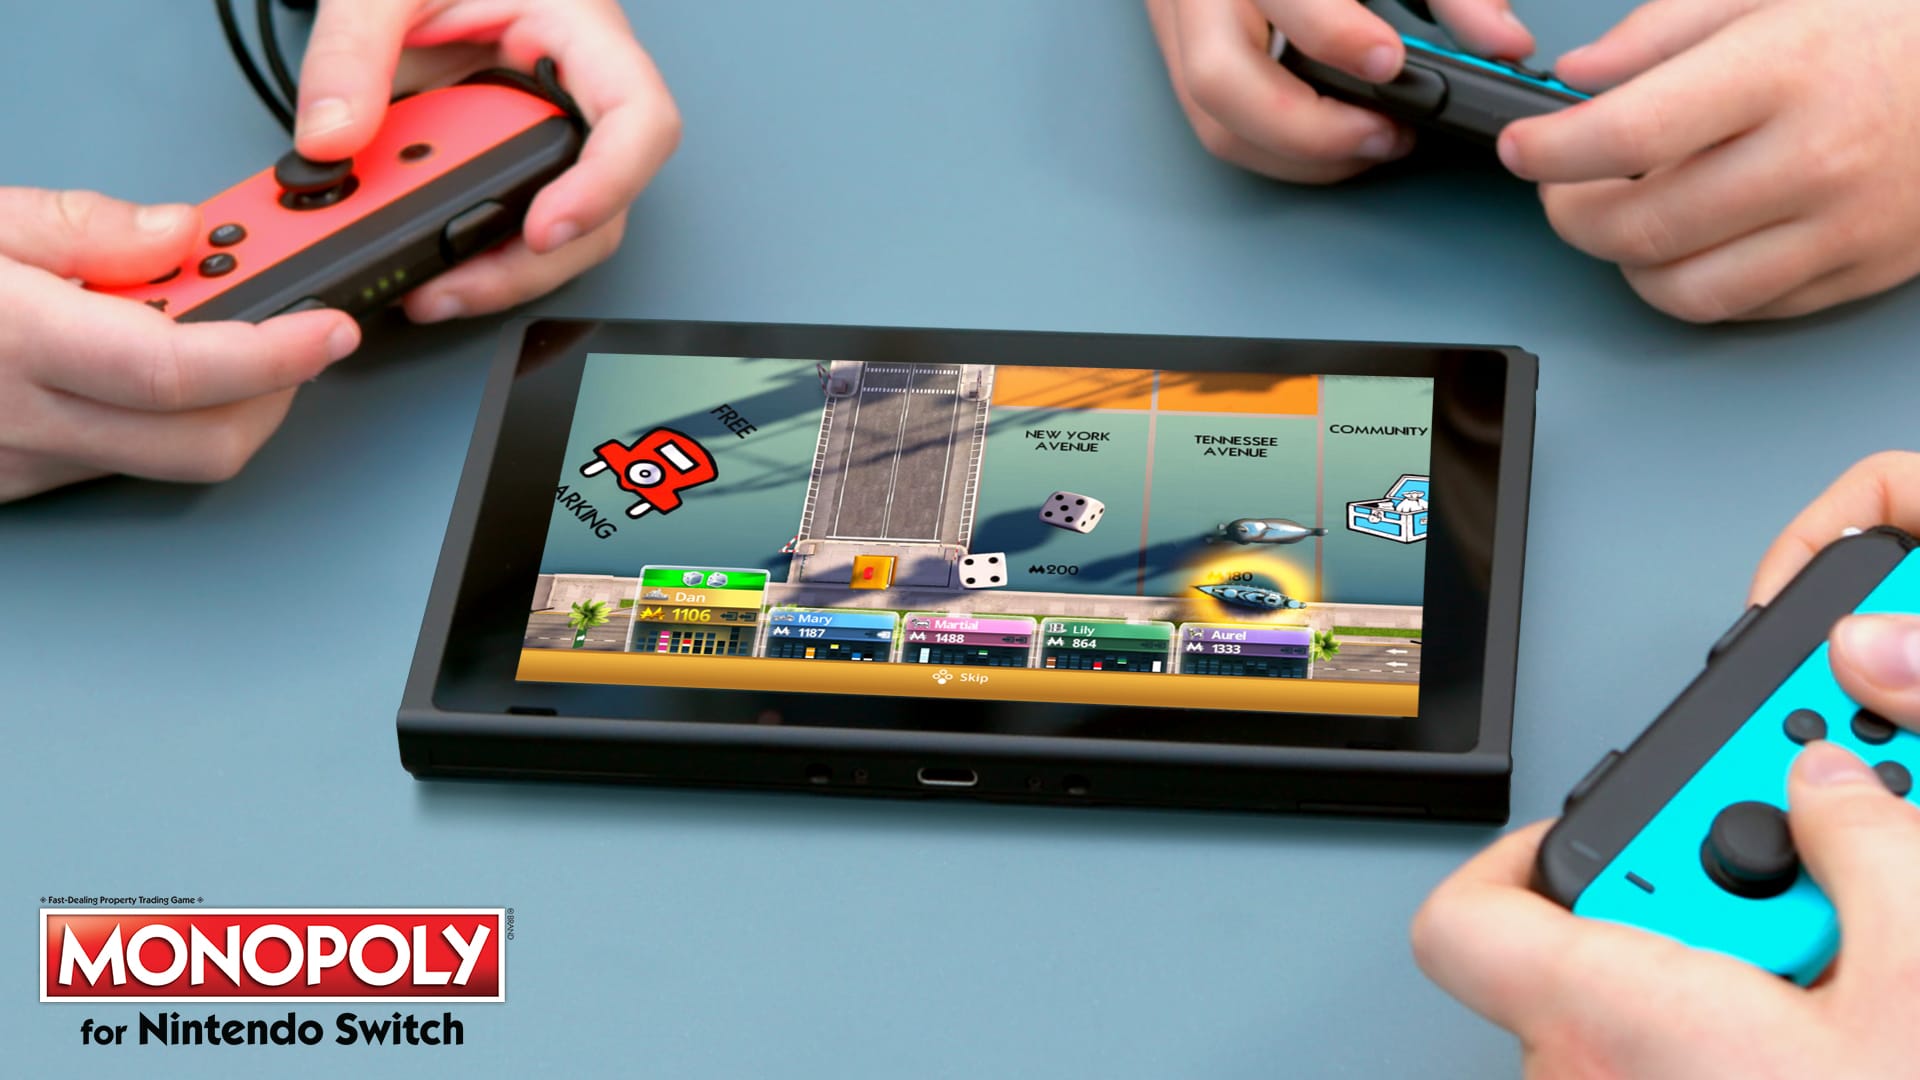 Monopoly for Nintendo Switch Promo Image 2